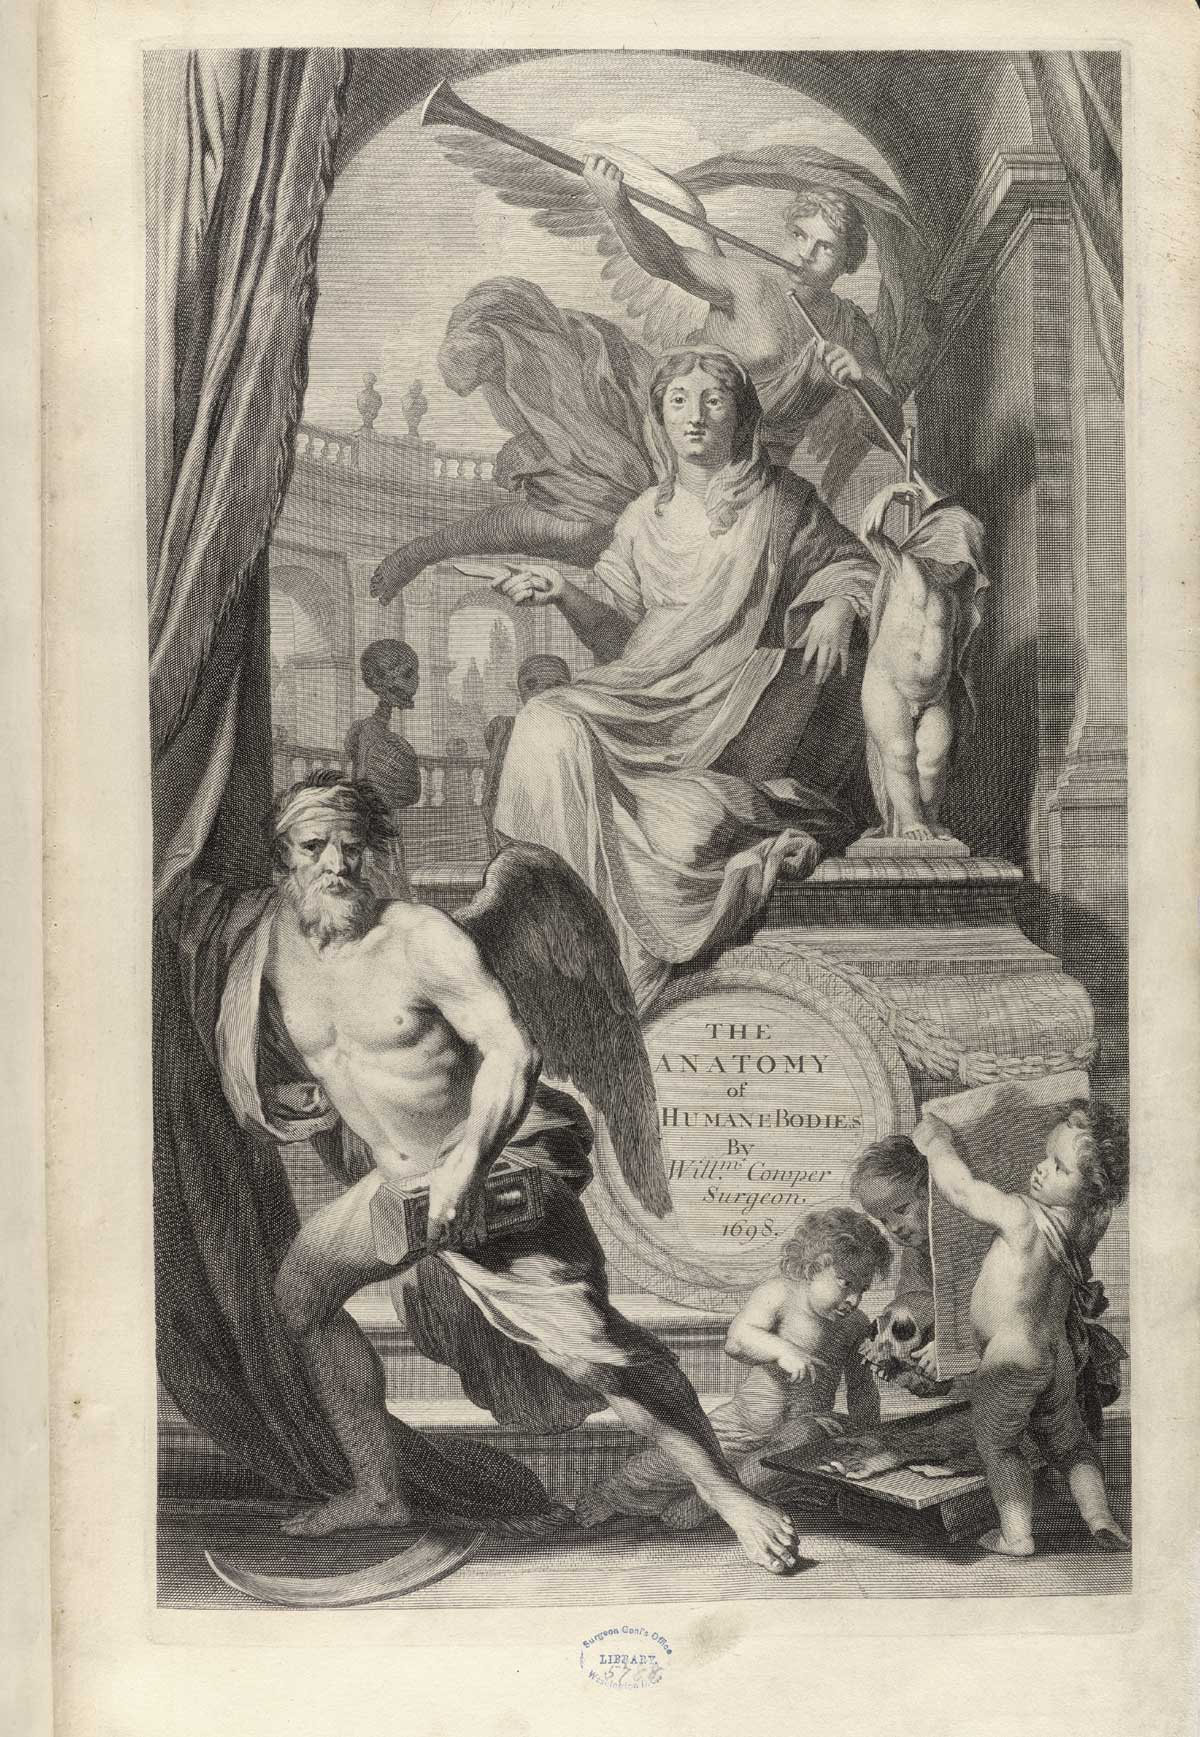 Engraved title page with allegorical scene featuring a goddess of wisdom seated on a throne with an angel above her blowing a horn, the throne engraved with the books title, and to the left underneath is an older bearded angel holding a scientific instrument in his left had, and in the bottom right corner are three babies looking at a skull and dissected arm; in the background is a Greek temple and two skeletons conversing, from William Cowper’s Anatomy of the humane bodies, NLM Call no.: WZ 250 C876a 1698.